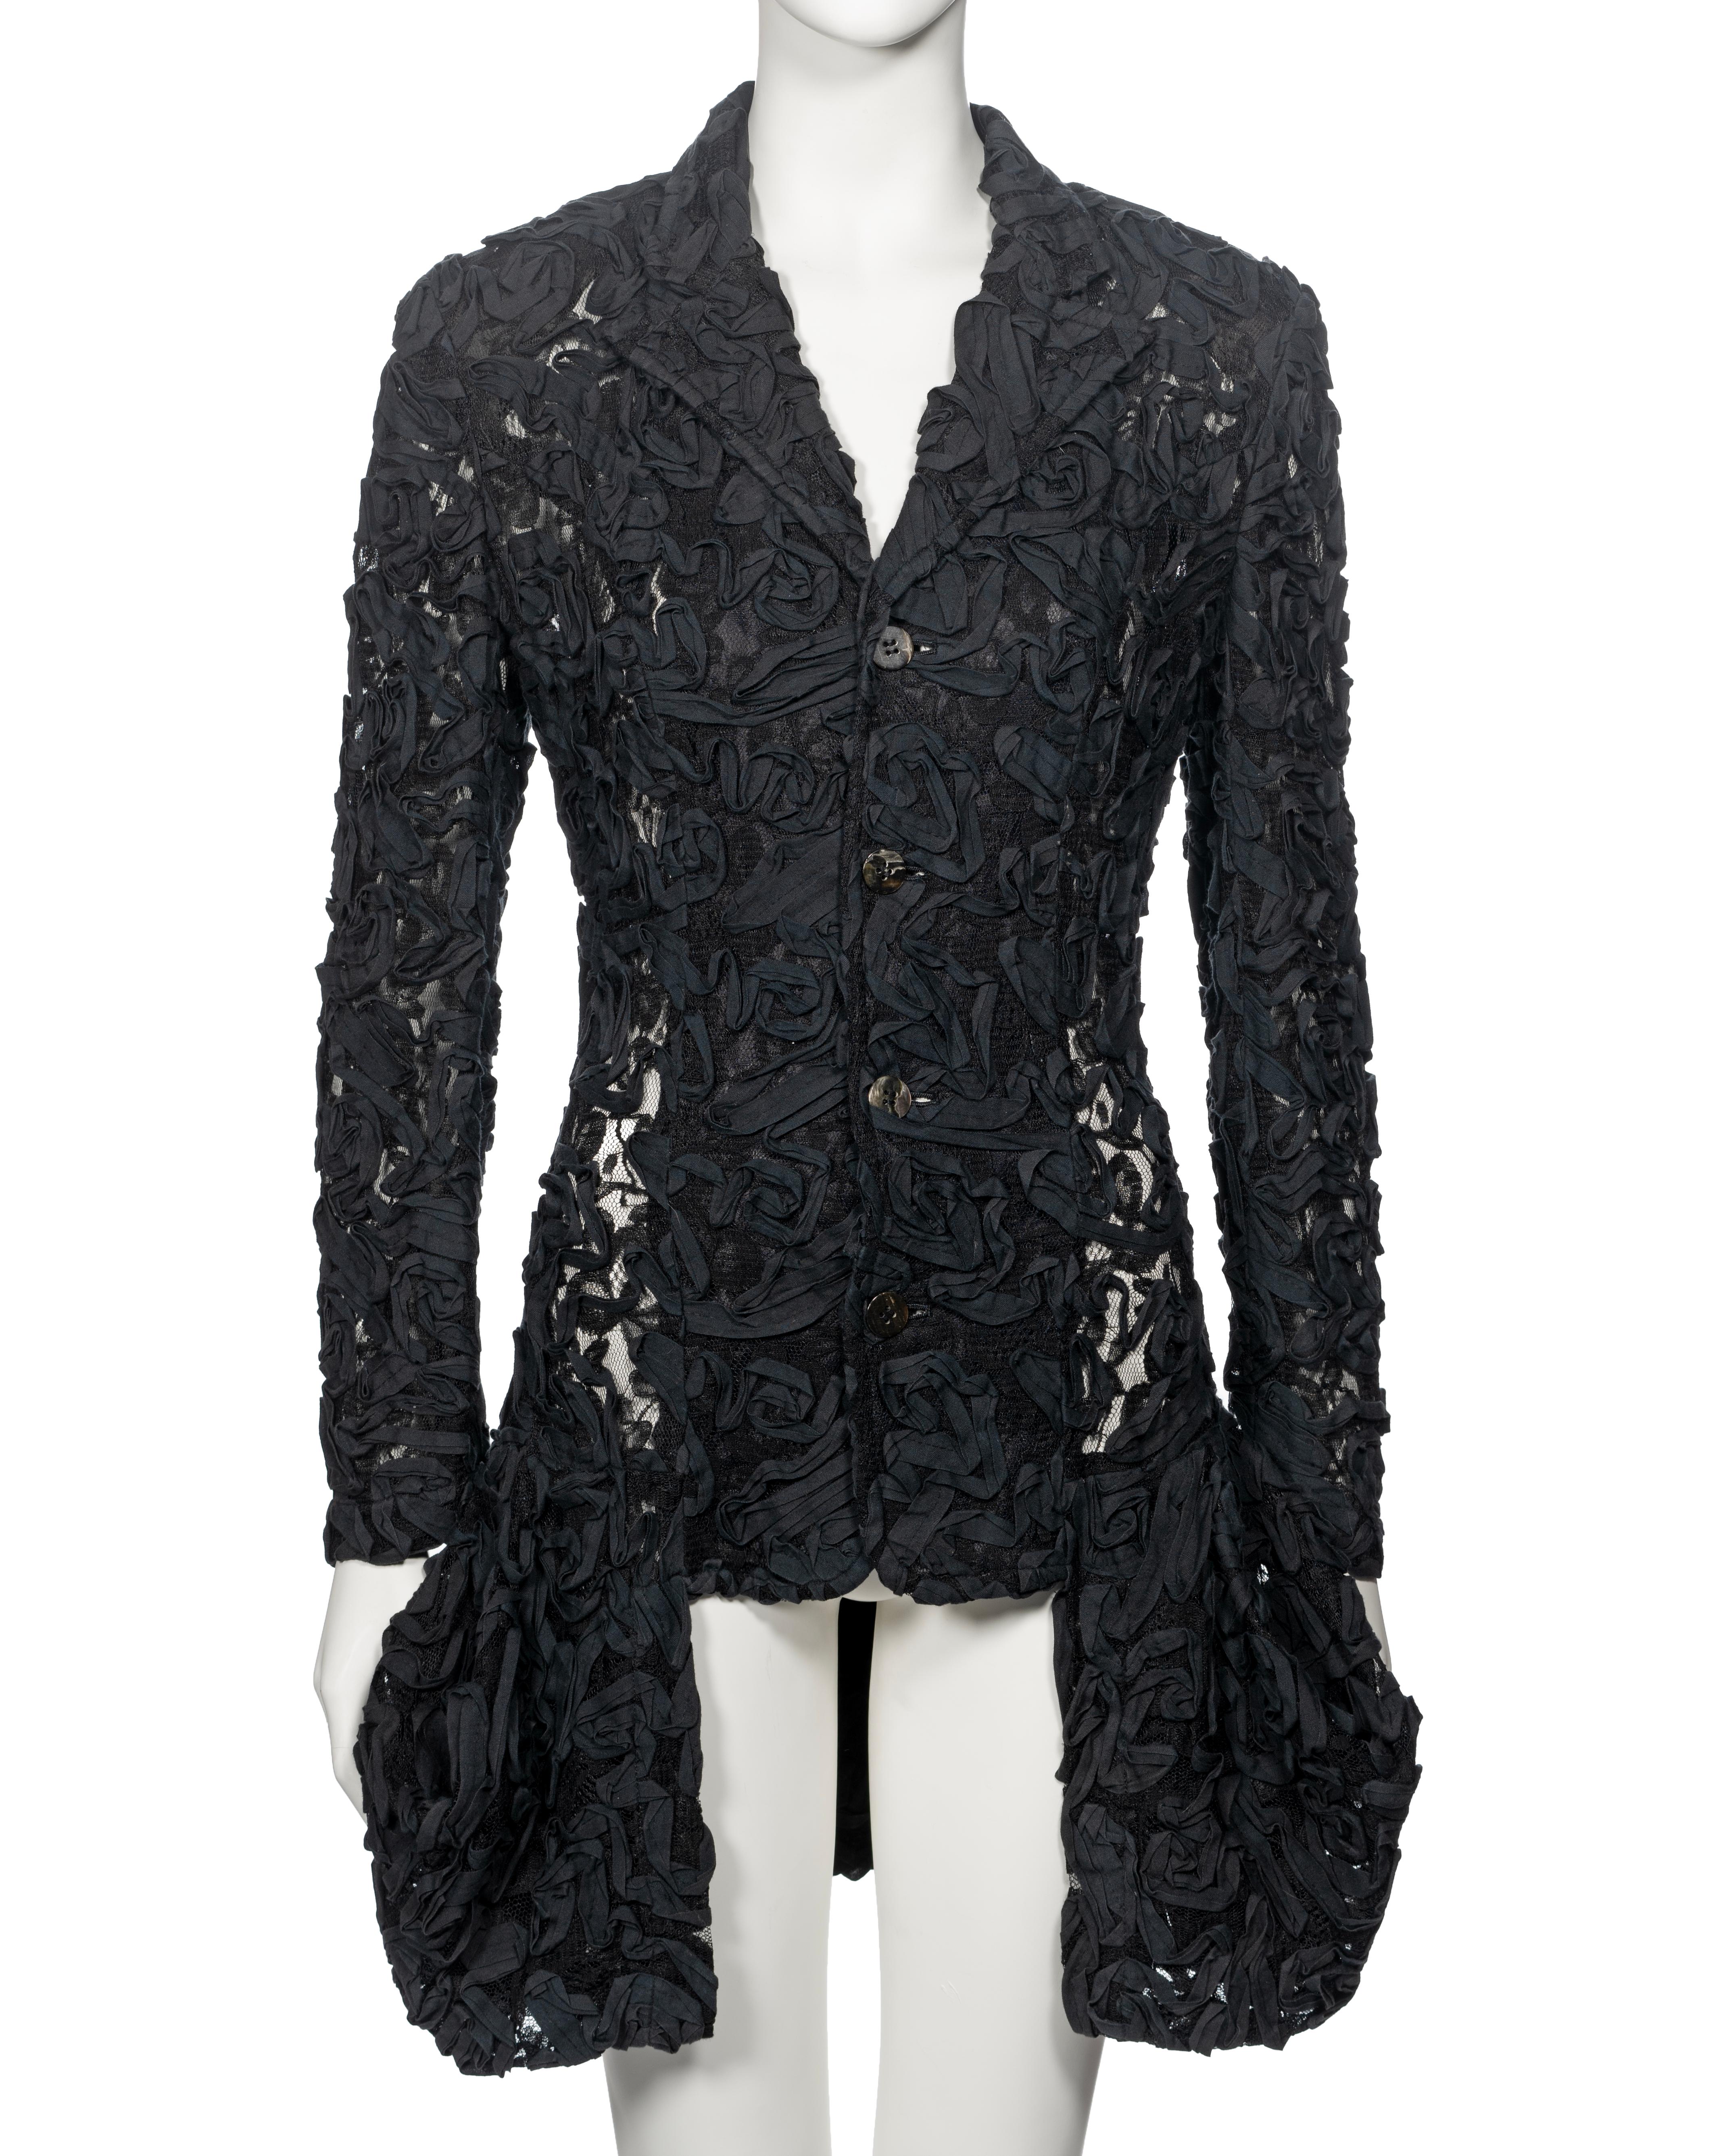 Comme des Garçons Black Lace Bubble Hem Jacket With Ribbon Embroidery, ss 1987 In Good Condition For Sale In London, GB